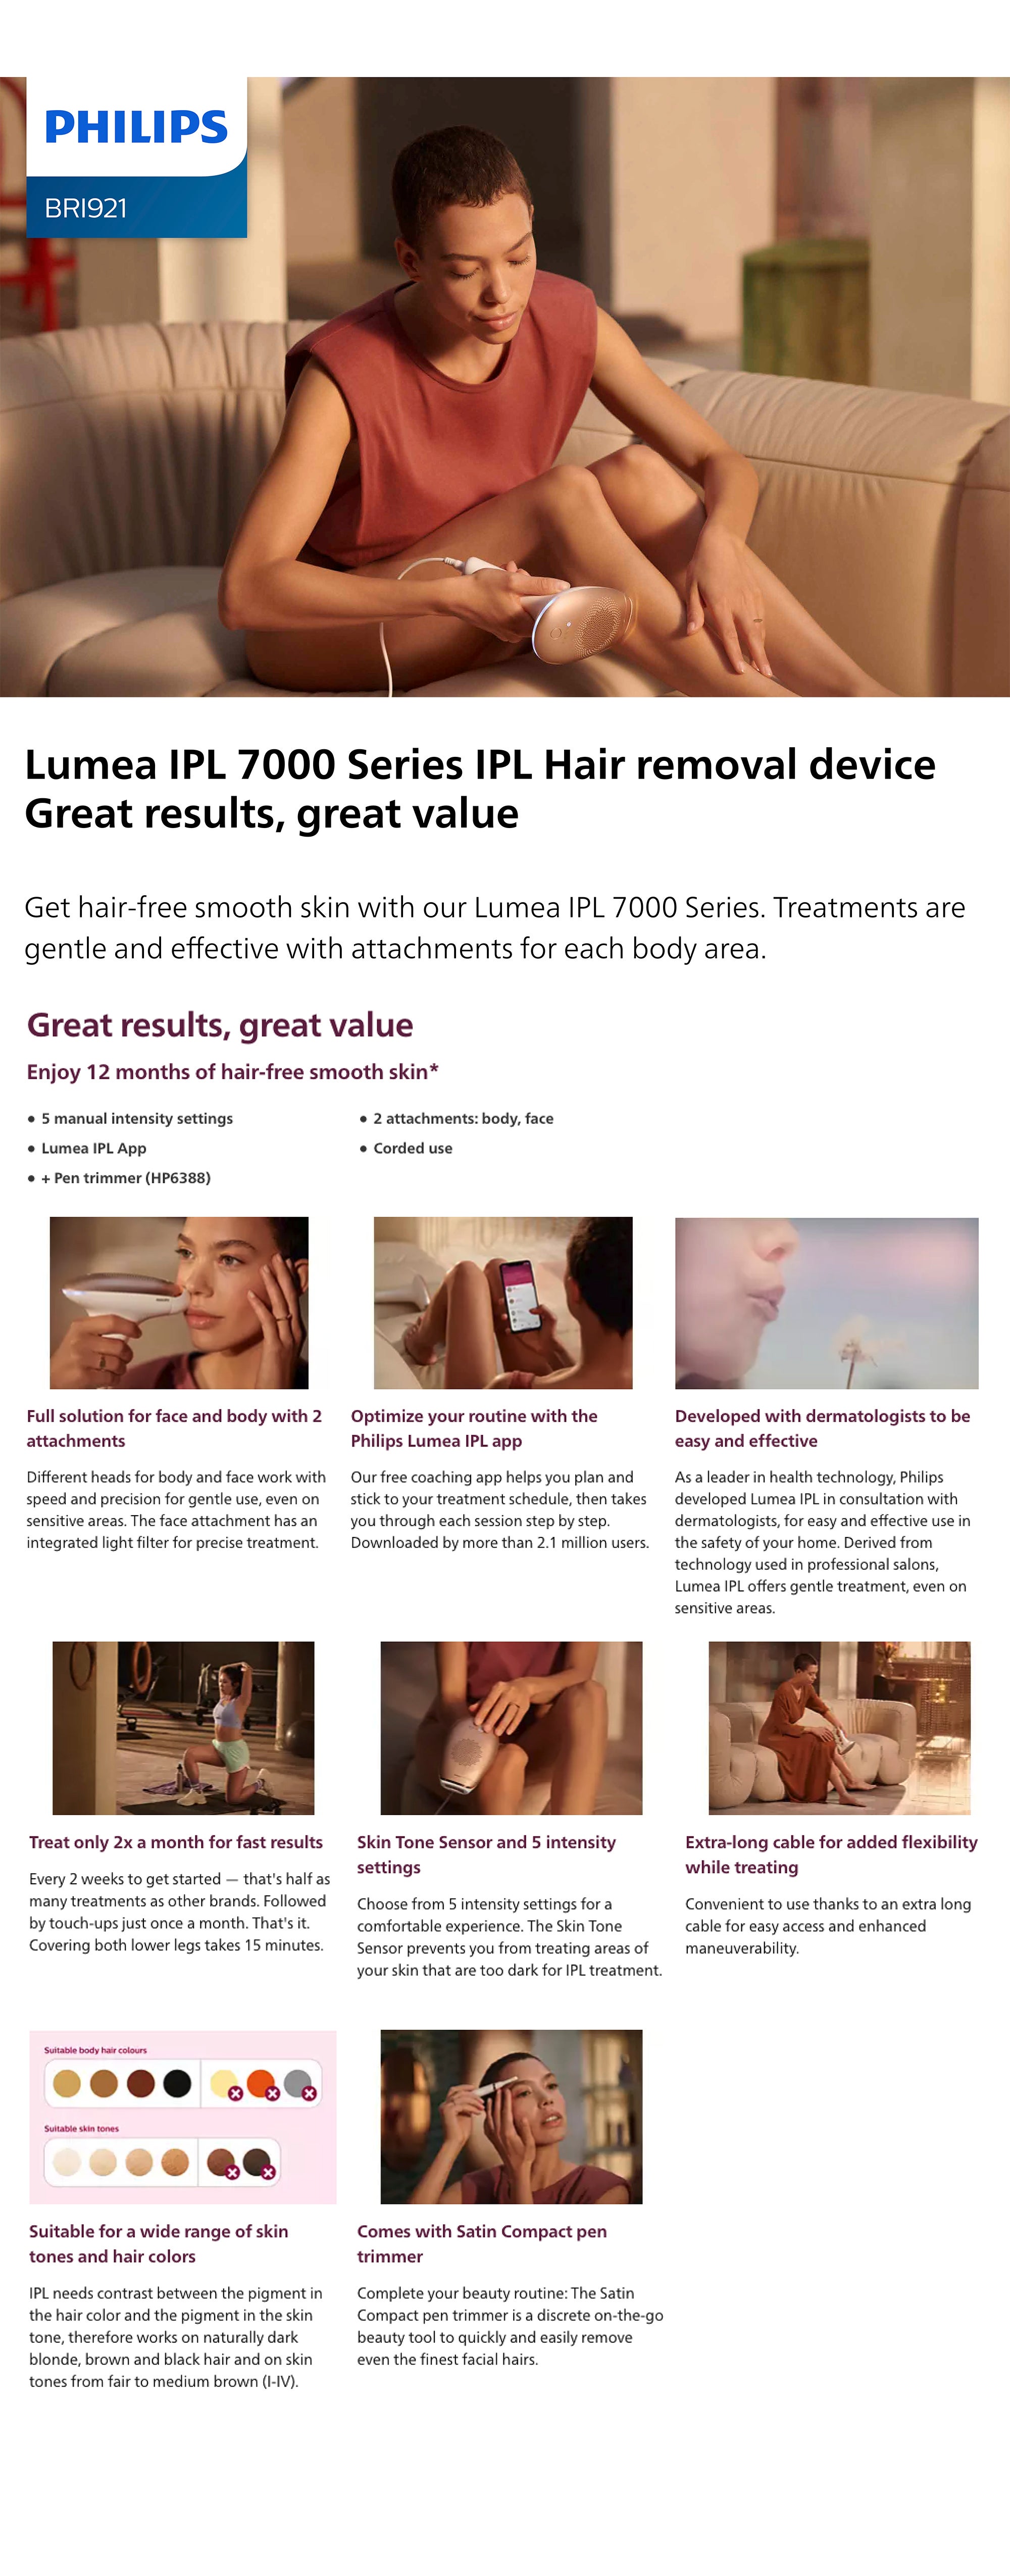 Philips Lumea BRI921 IPL Hair Removal Device for Body